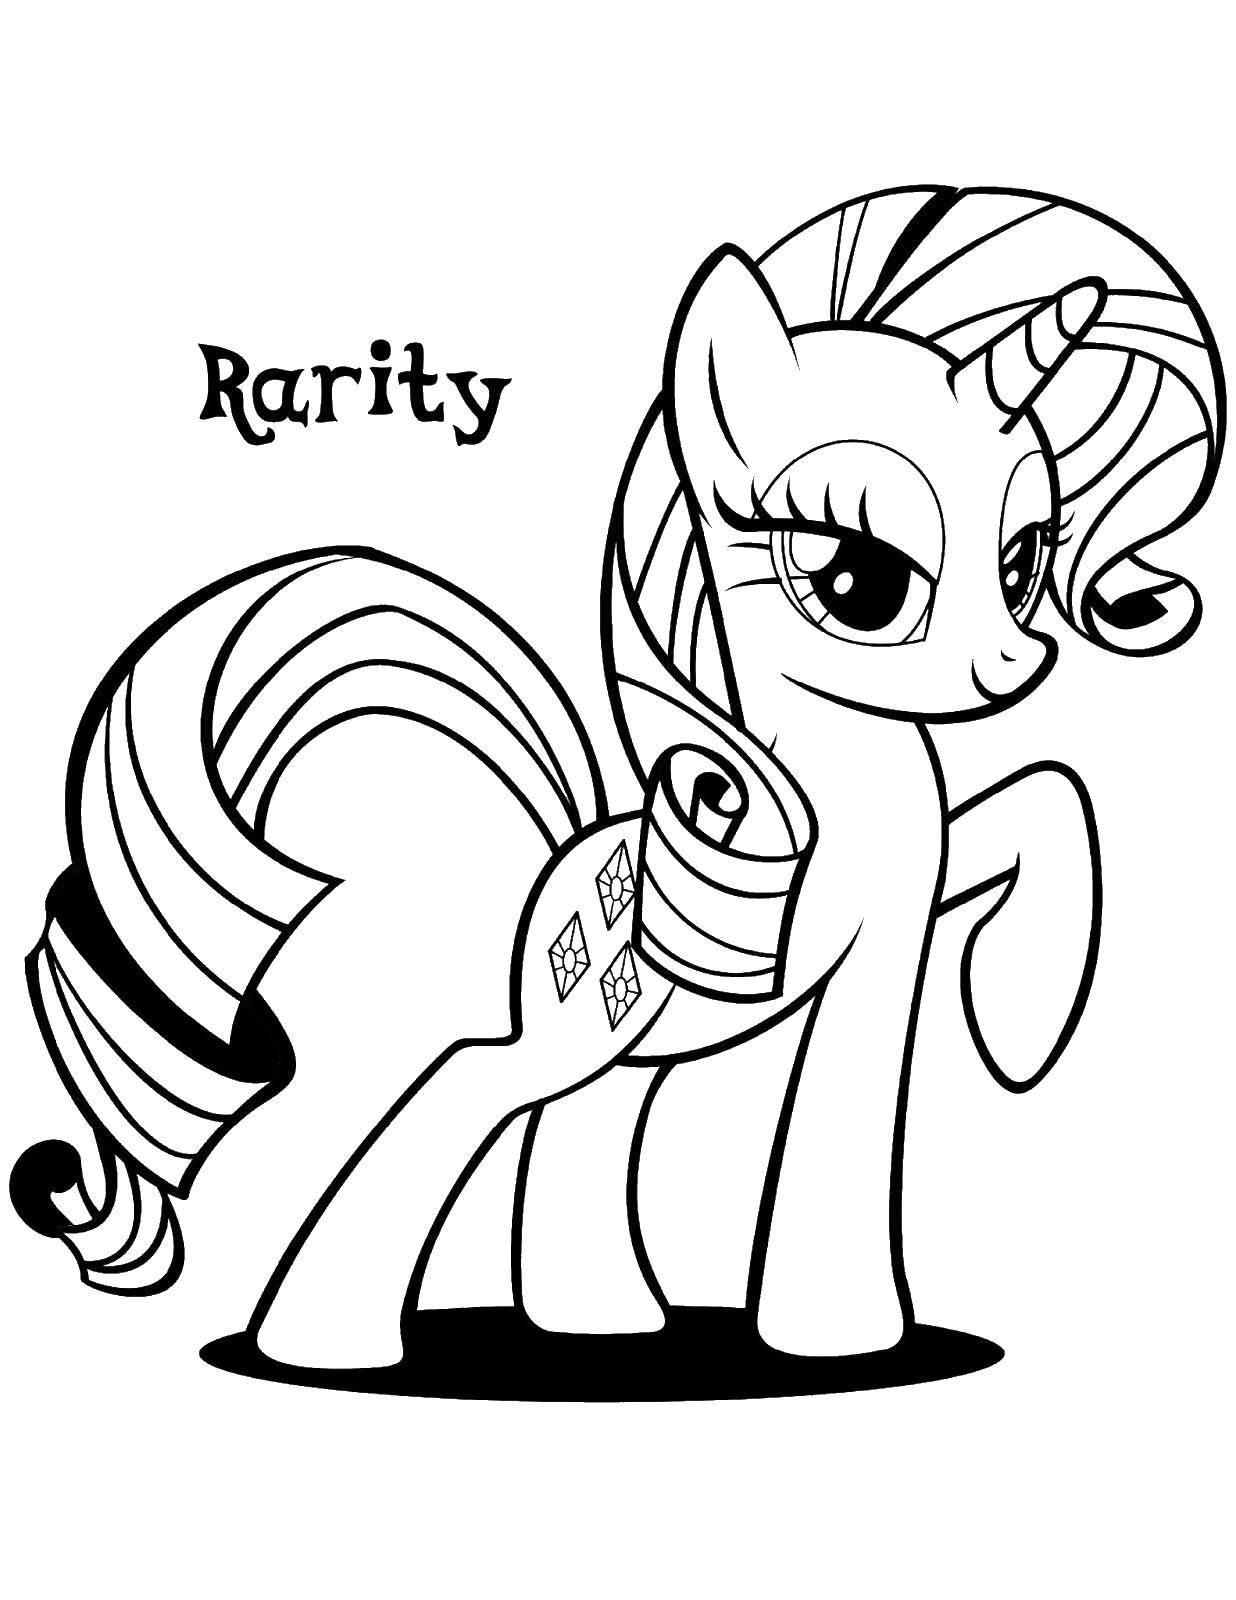 Coloring Rarity.. Category my little pony. Tags:  Pony, My little pony .